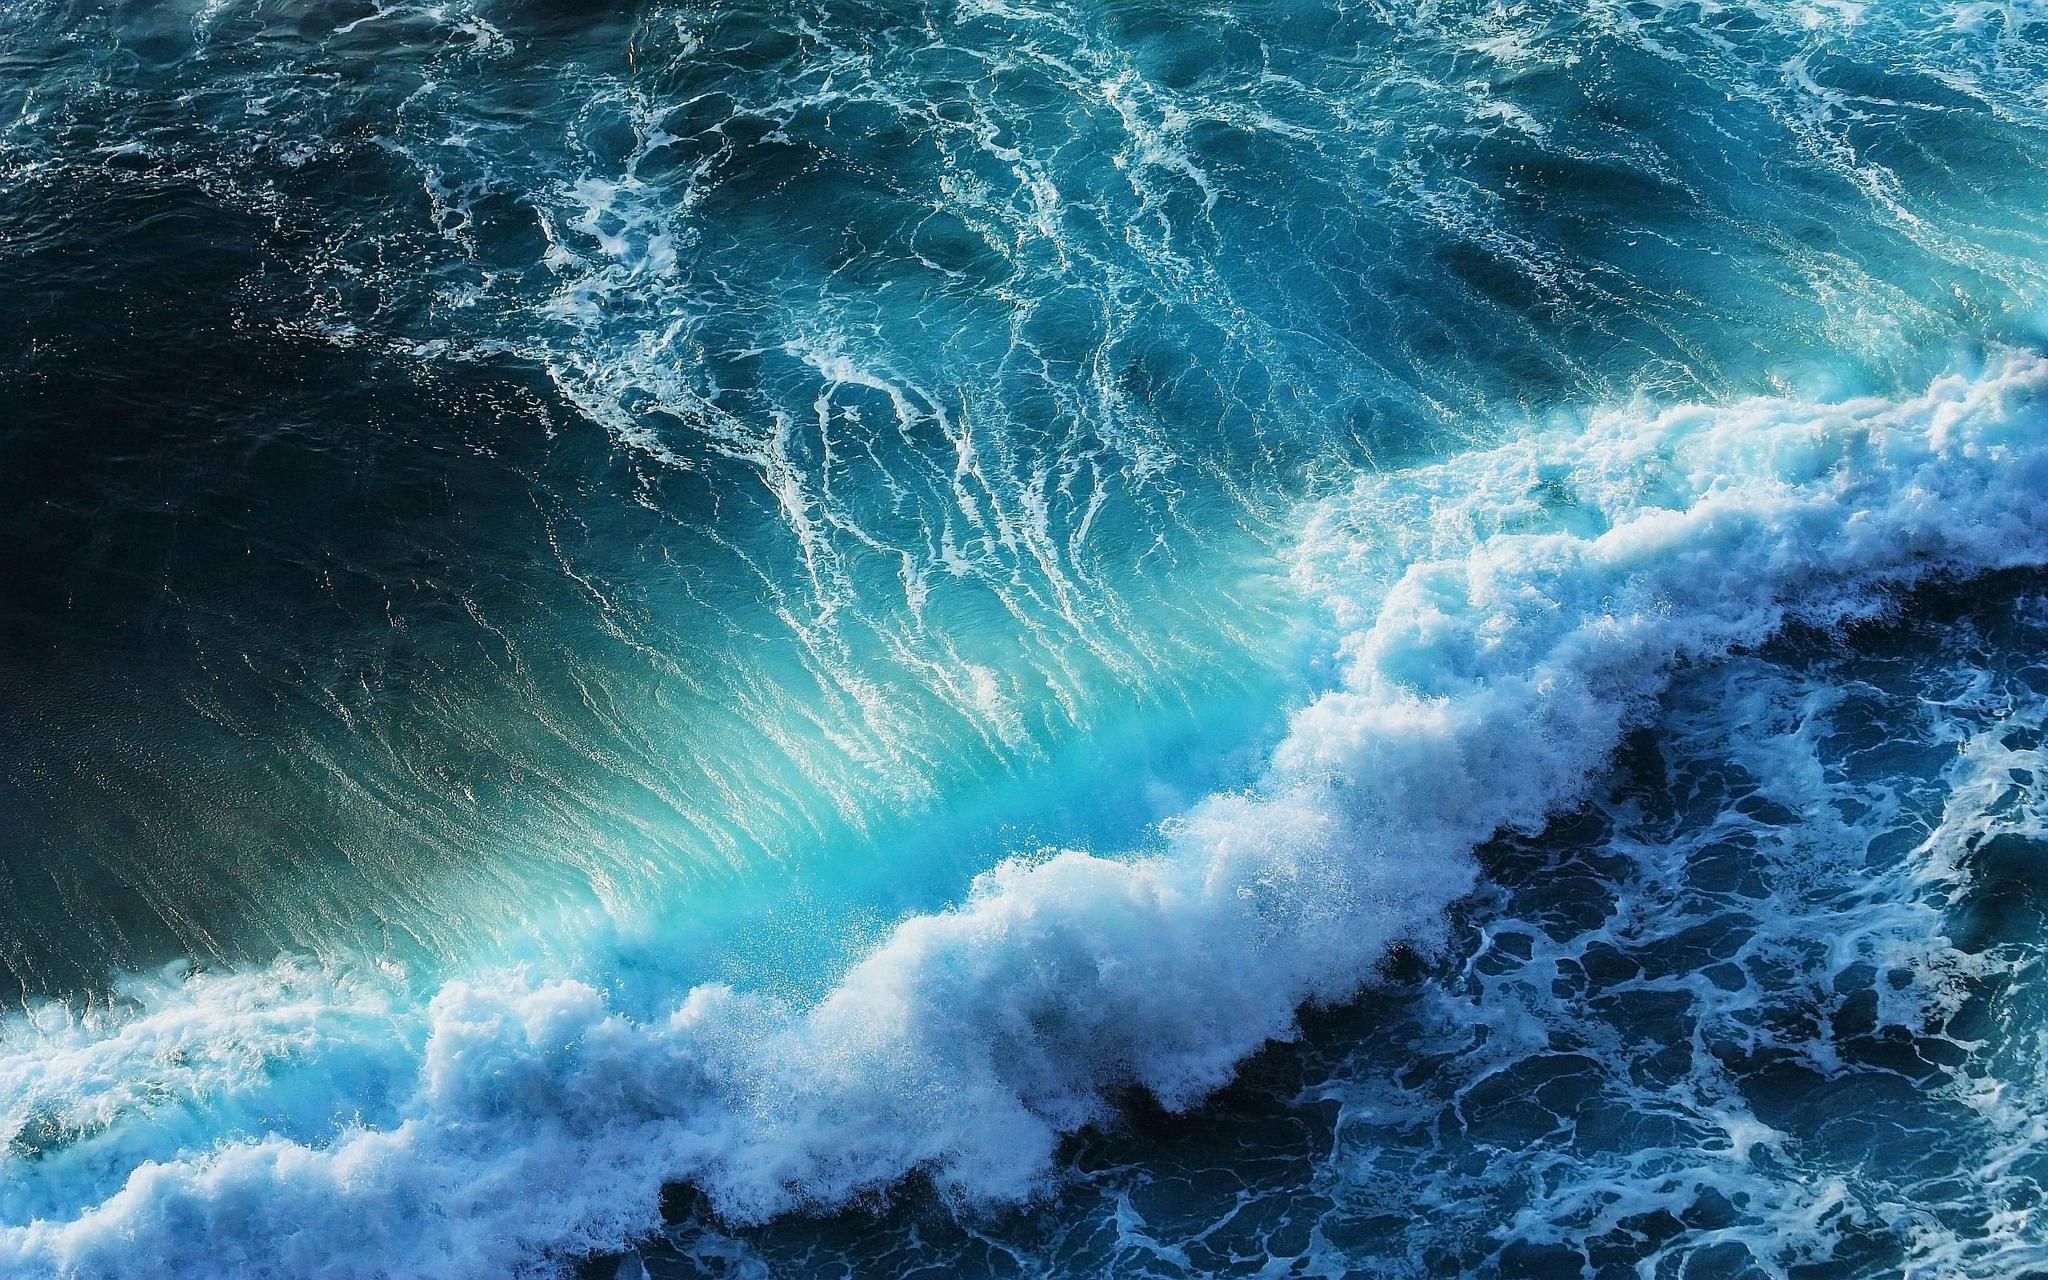 9 Awesome Wave Wallpapers to Decorate Backgrounds Like an